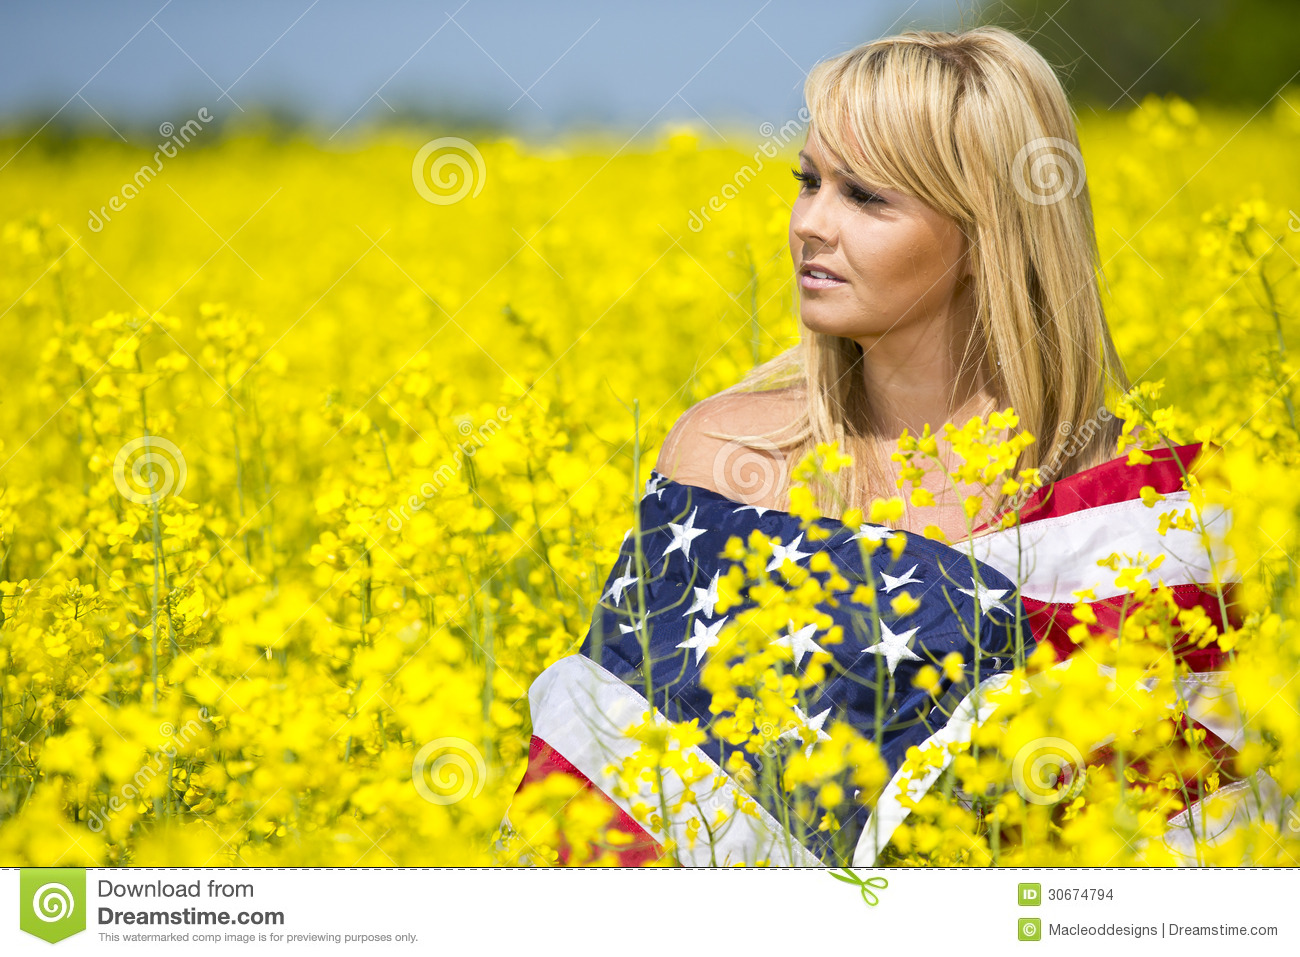 Girl Is Wrapped In The American Flag In A Field Of Yellow Flowers